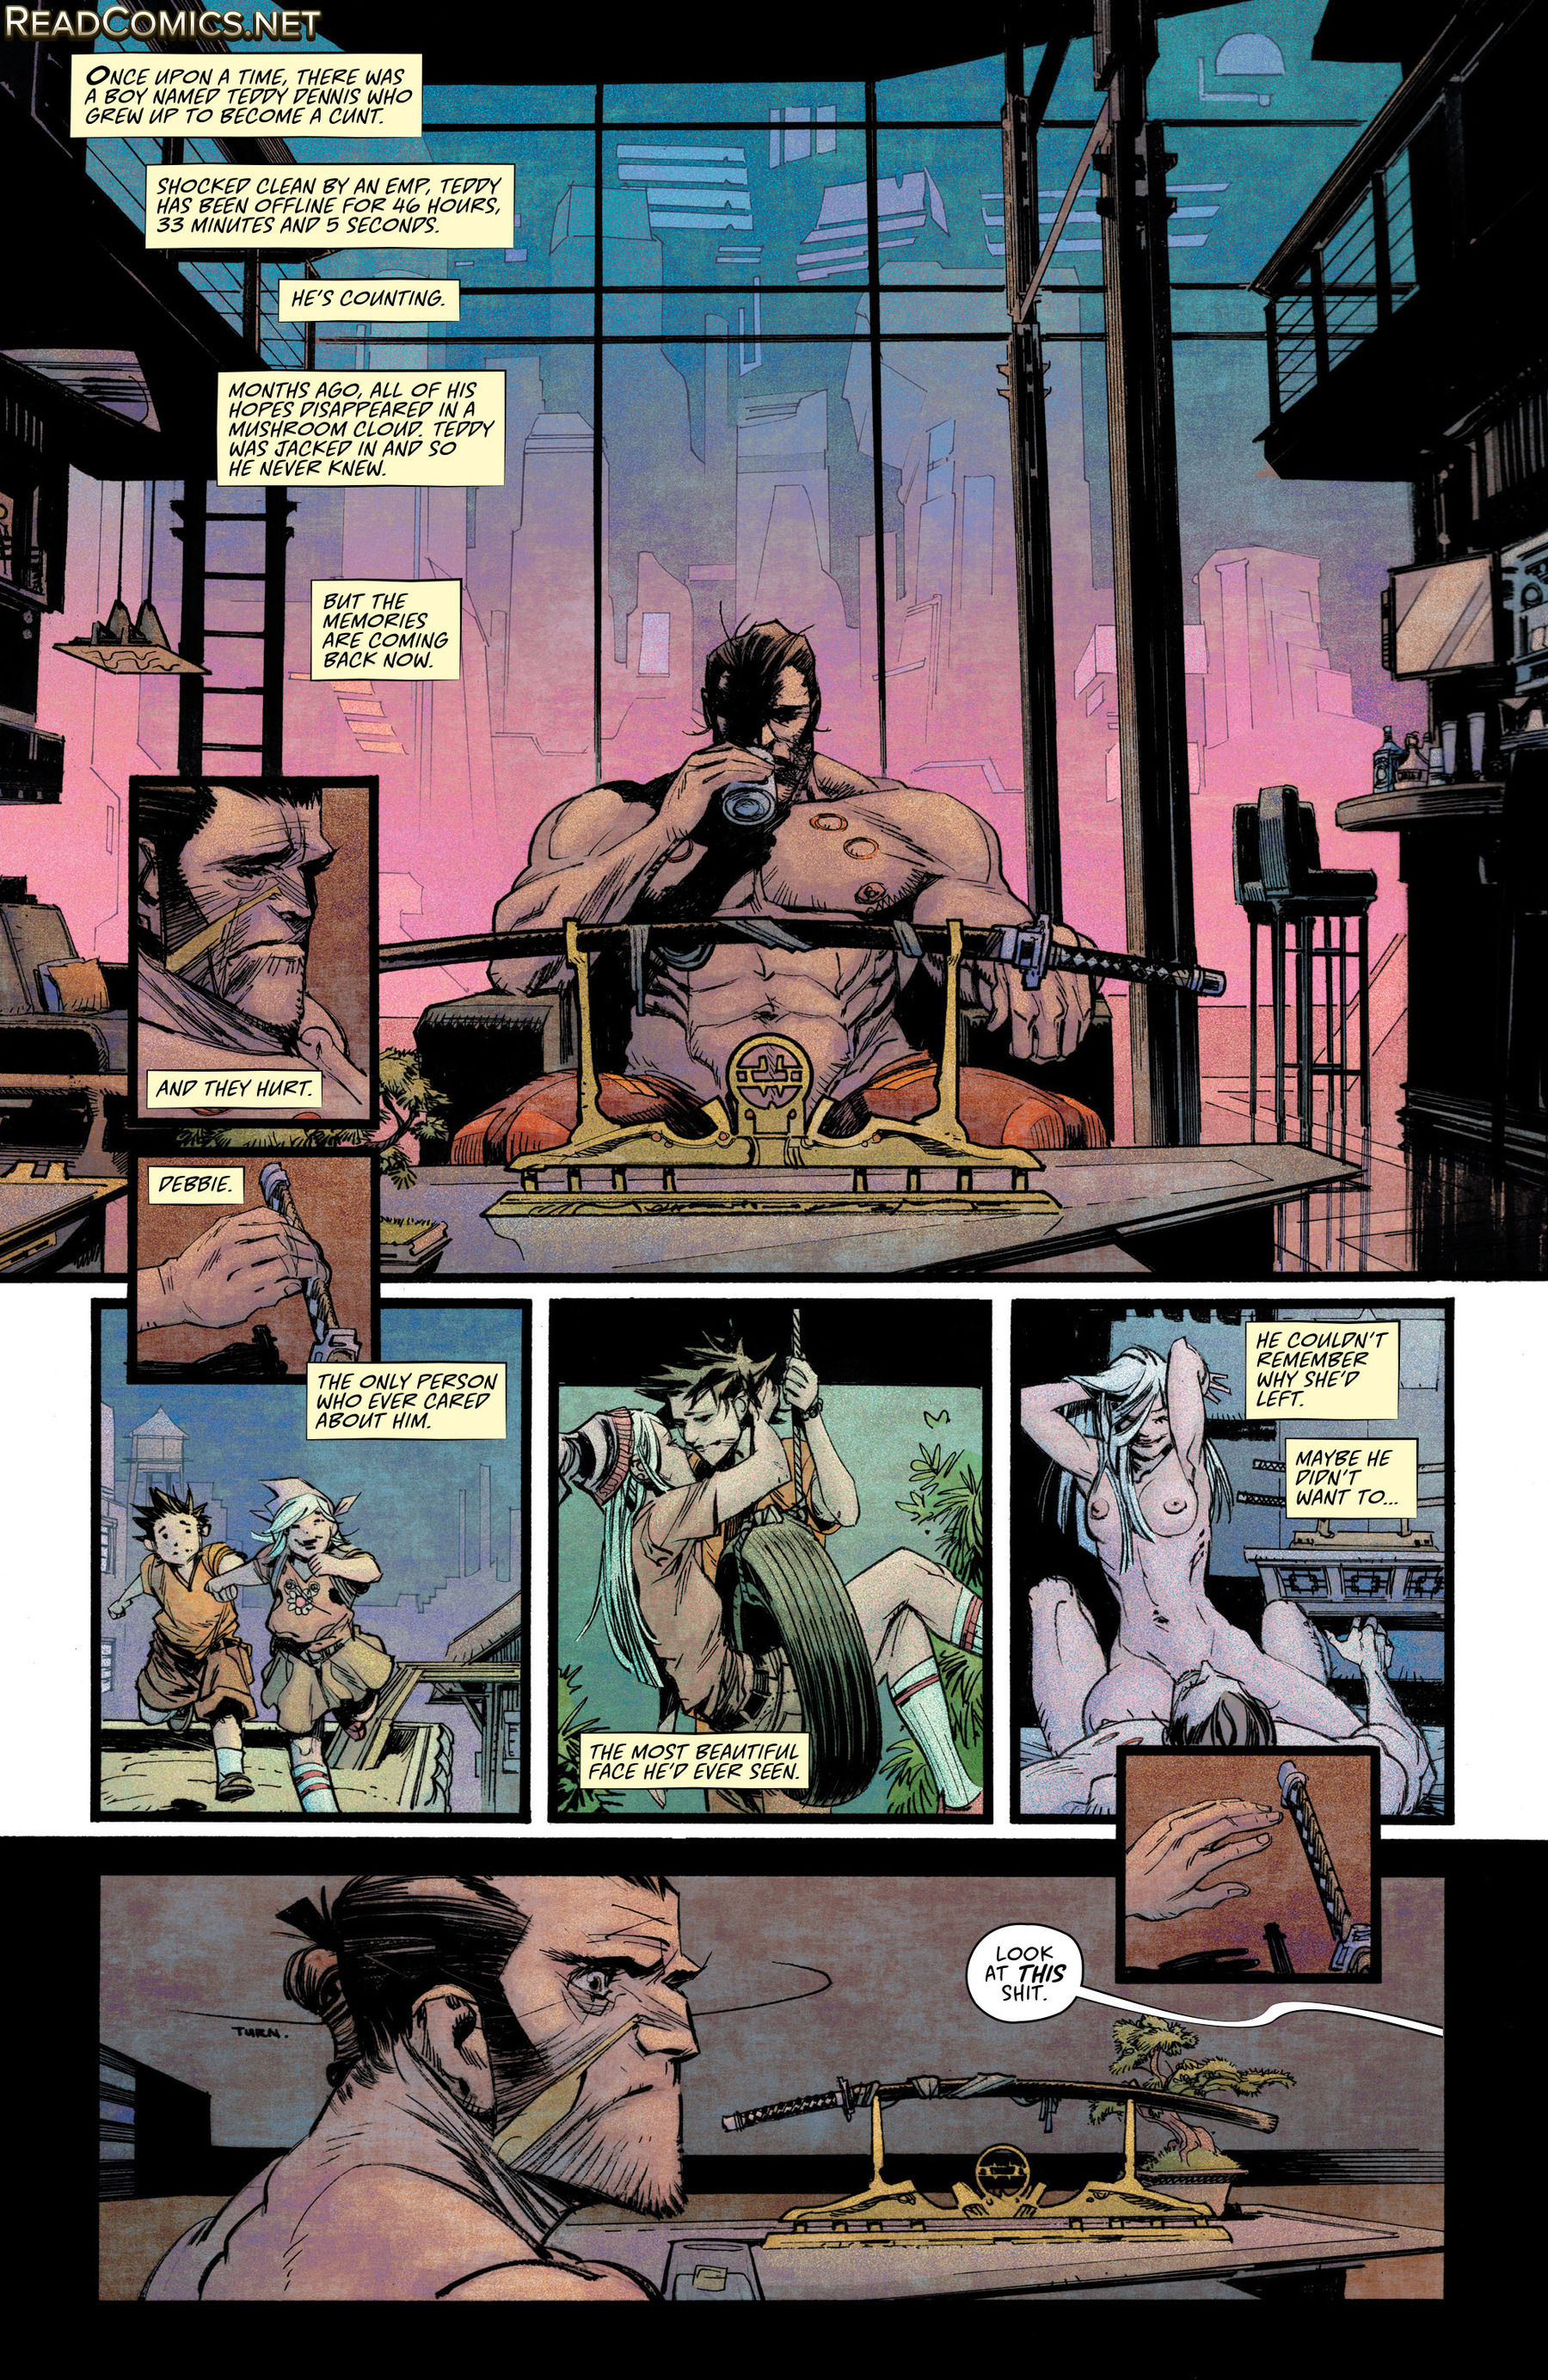 Tokyo Ghost (2015-): Chapter 7 - Page 3